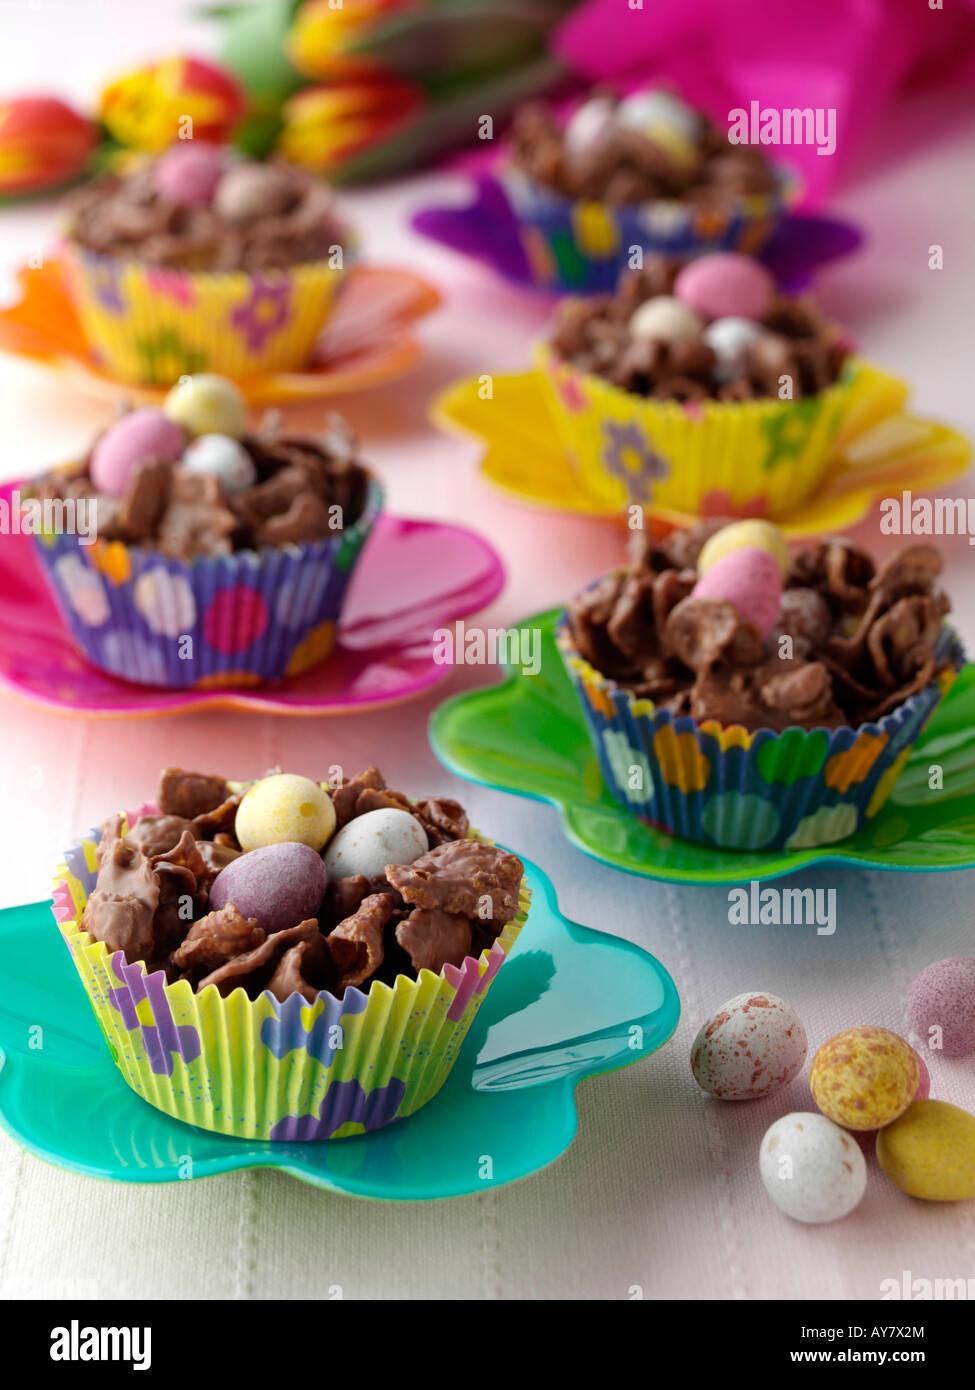 Chocolate Easter nests sweets editorial food Stock Photo